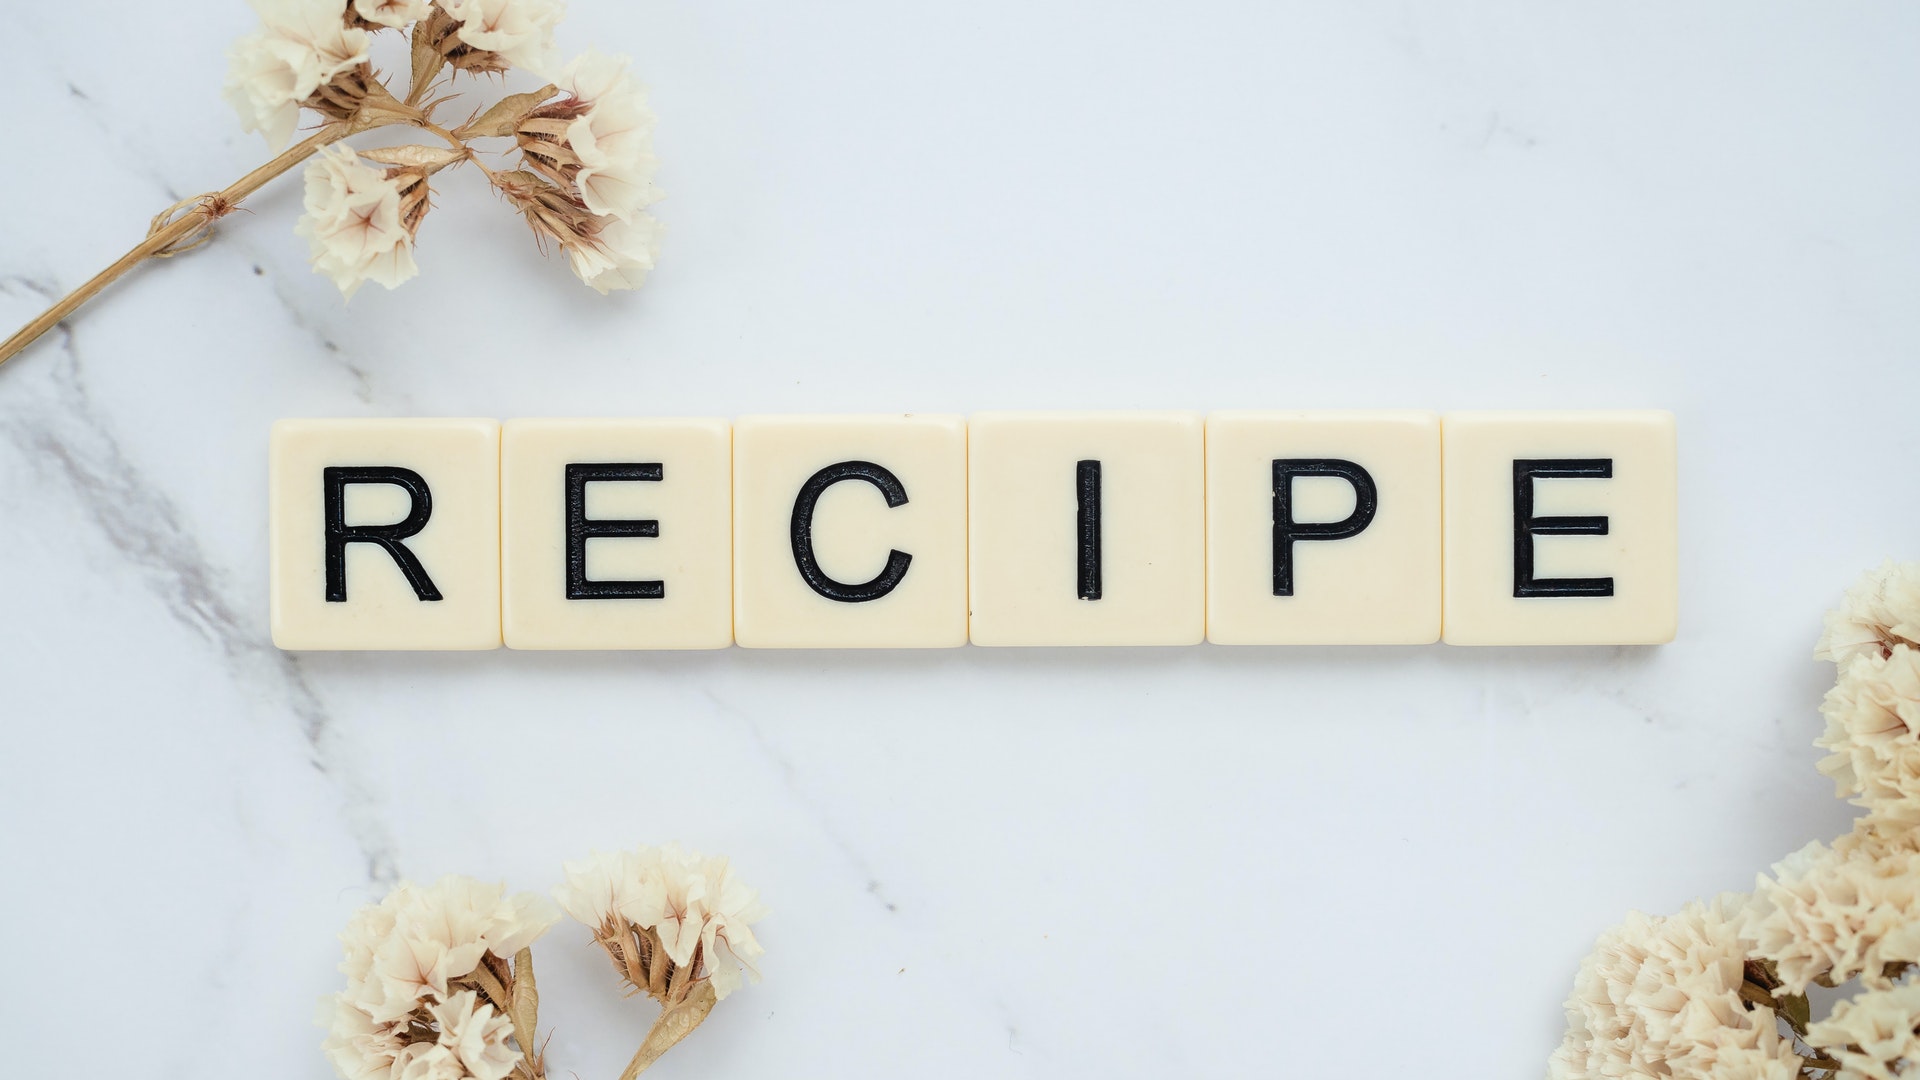 Scrabble pieces spelling out "recipe" with a marble background, surrounded by pale flowers